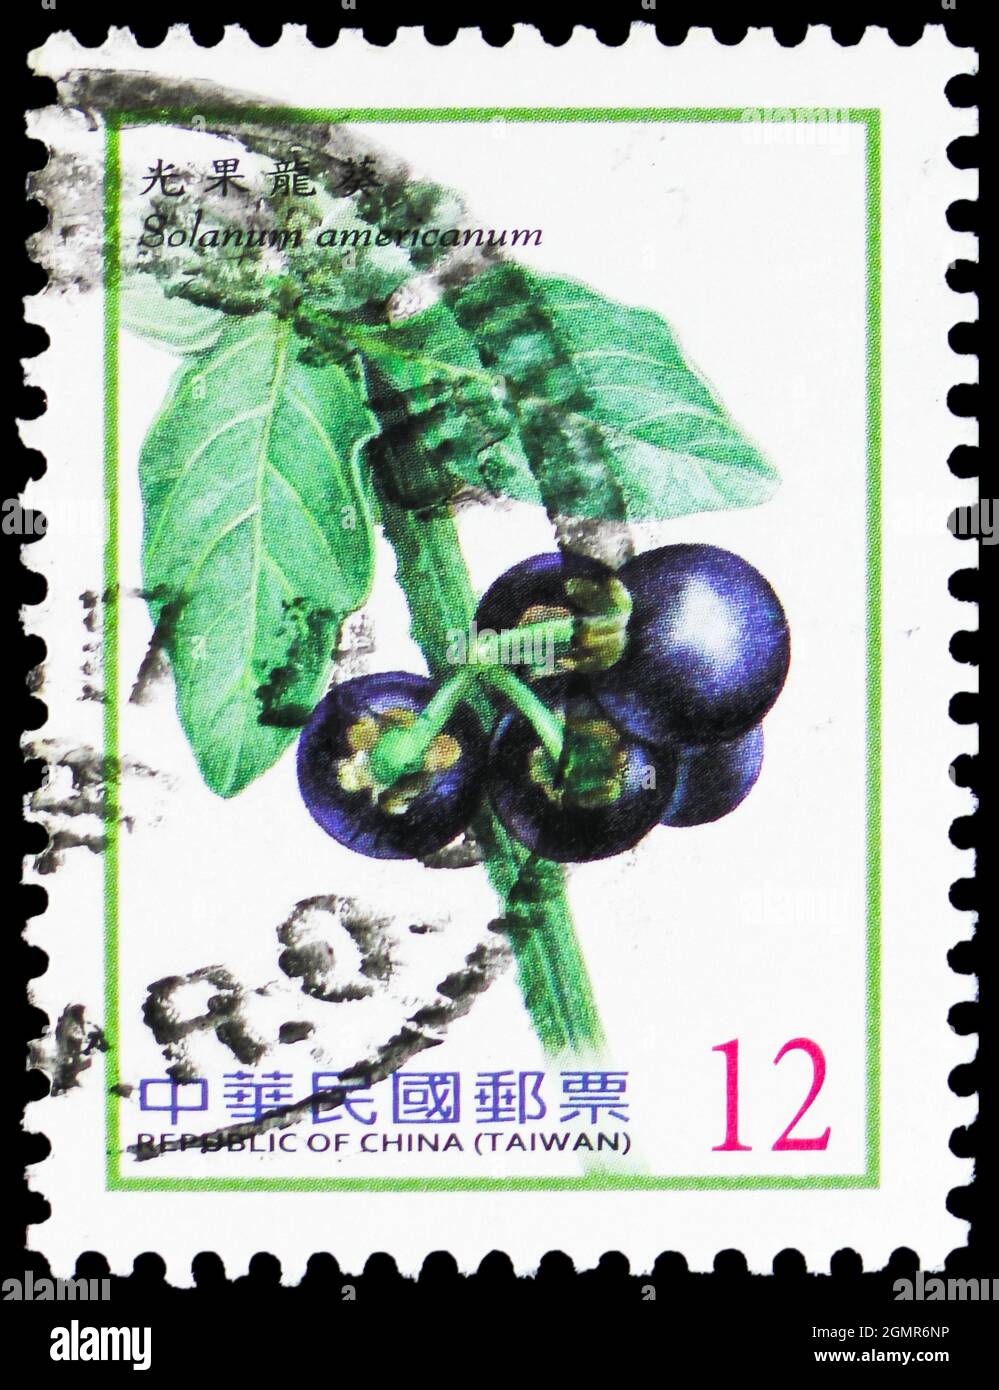 MOSCOW, RUSSIA - JULY 31, 2021: Postage stamp printed in Taiwan shows Solanum americanum, Berries (2012-2014) serie, circa 2012 Stock Photo